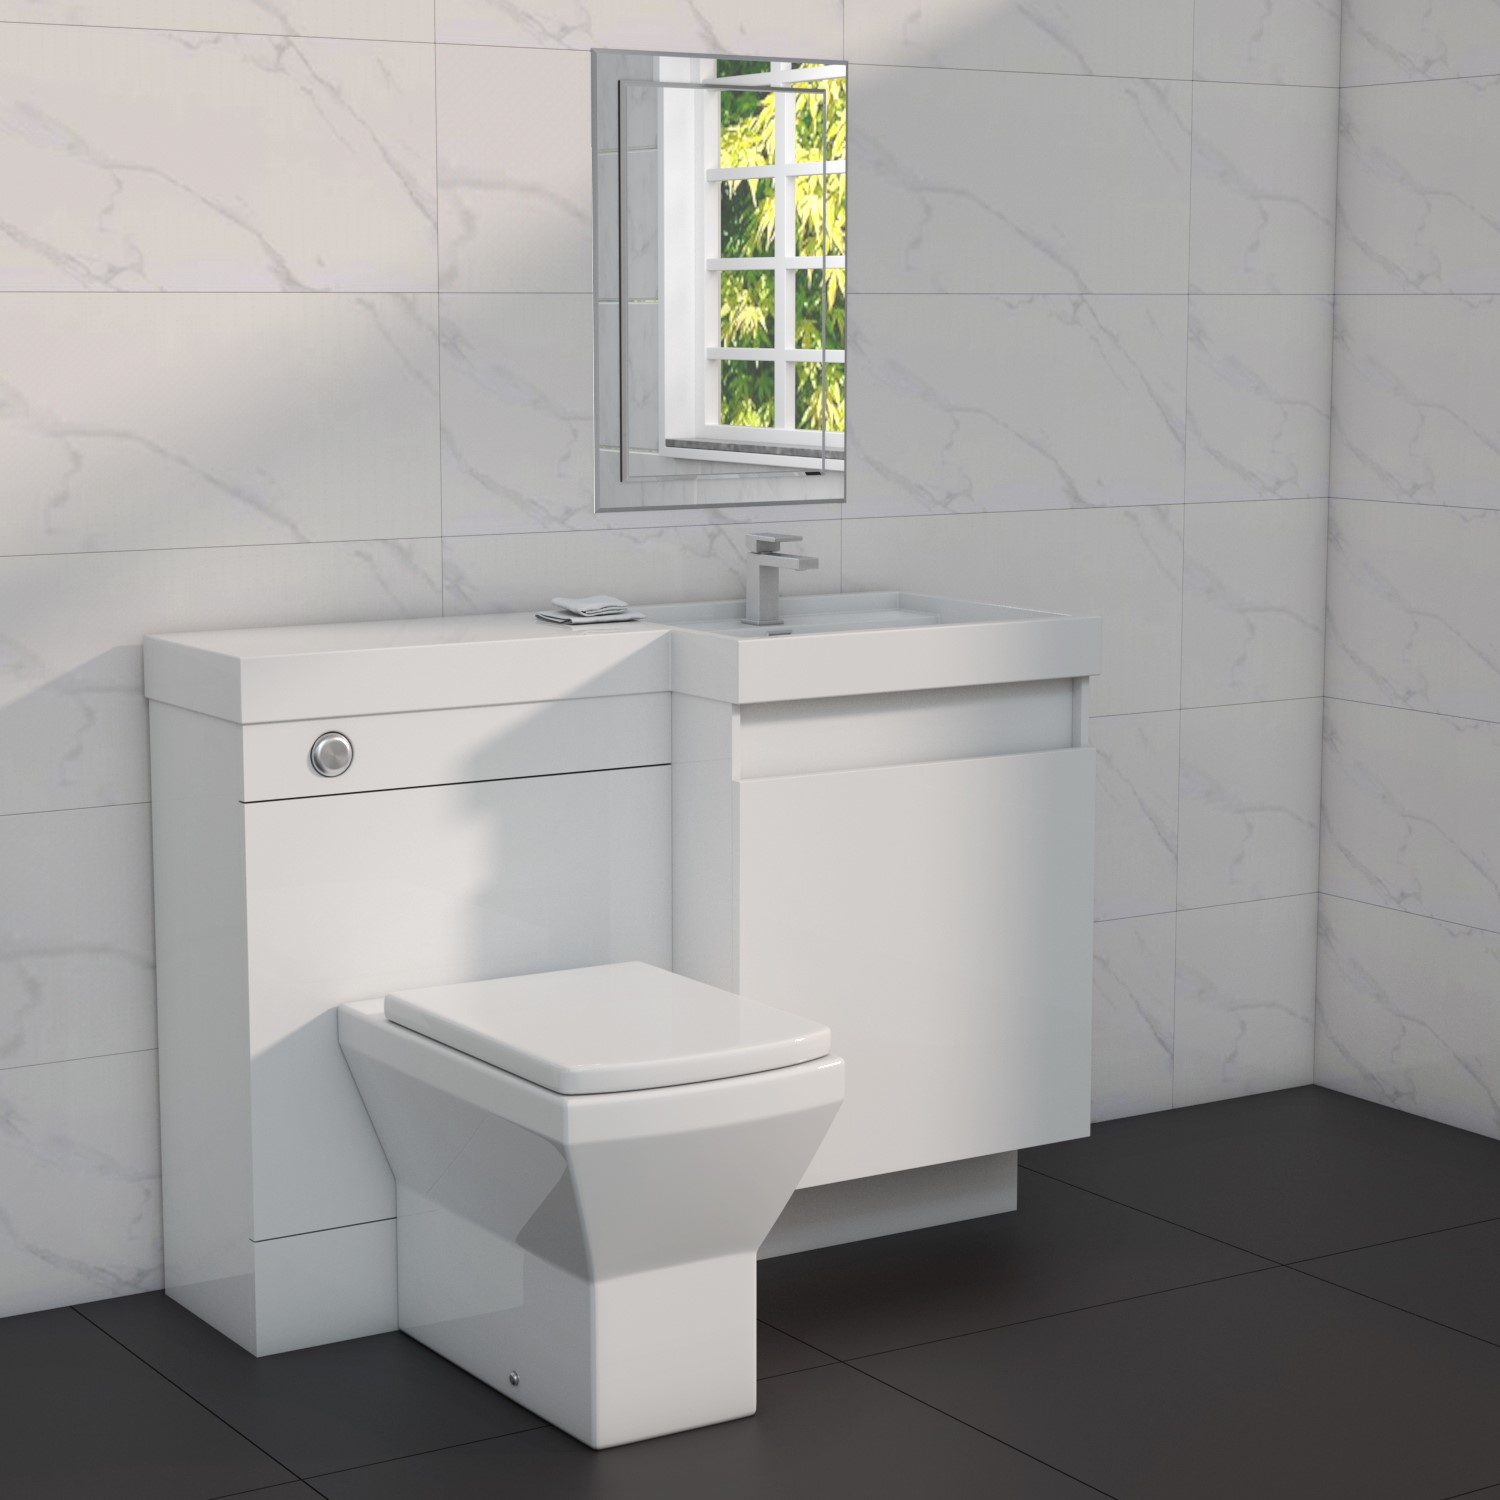 1200mm White Toilet And Sink Unit Right, Bathroom Vanity Units With Toilet